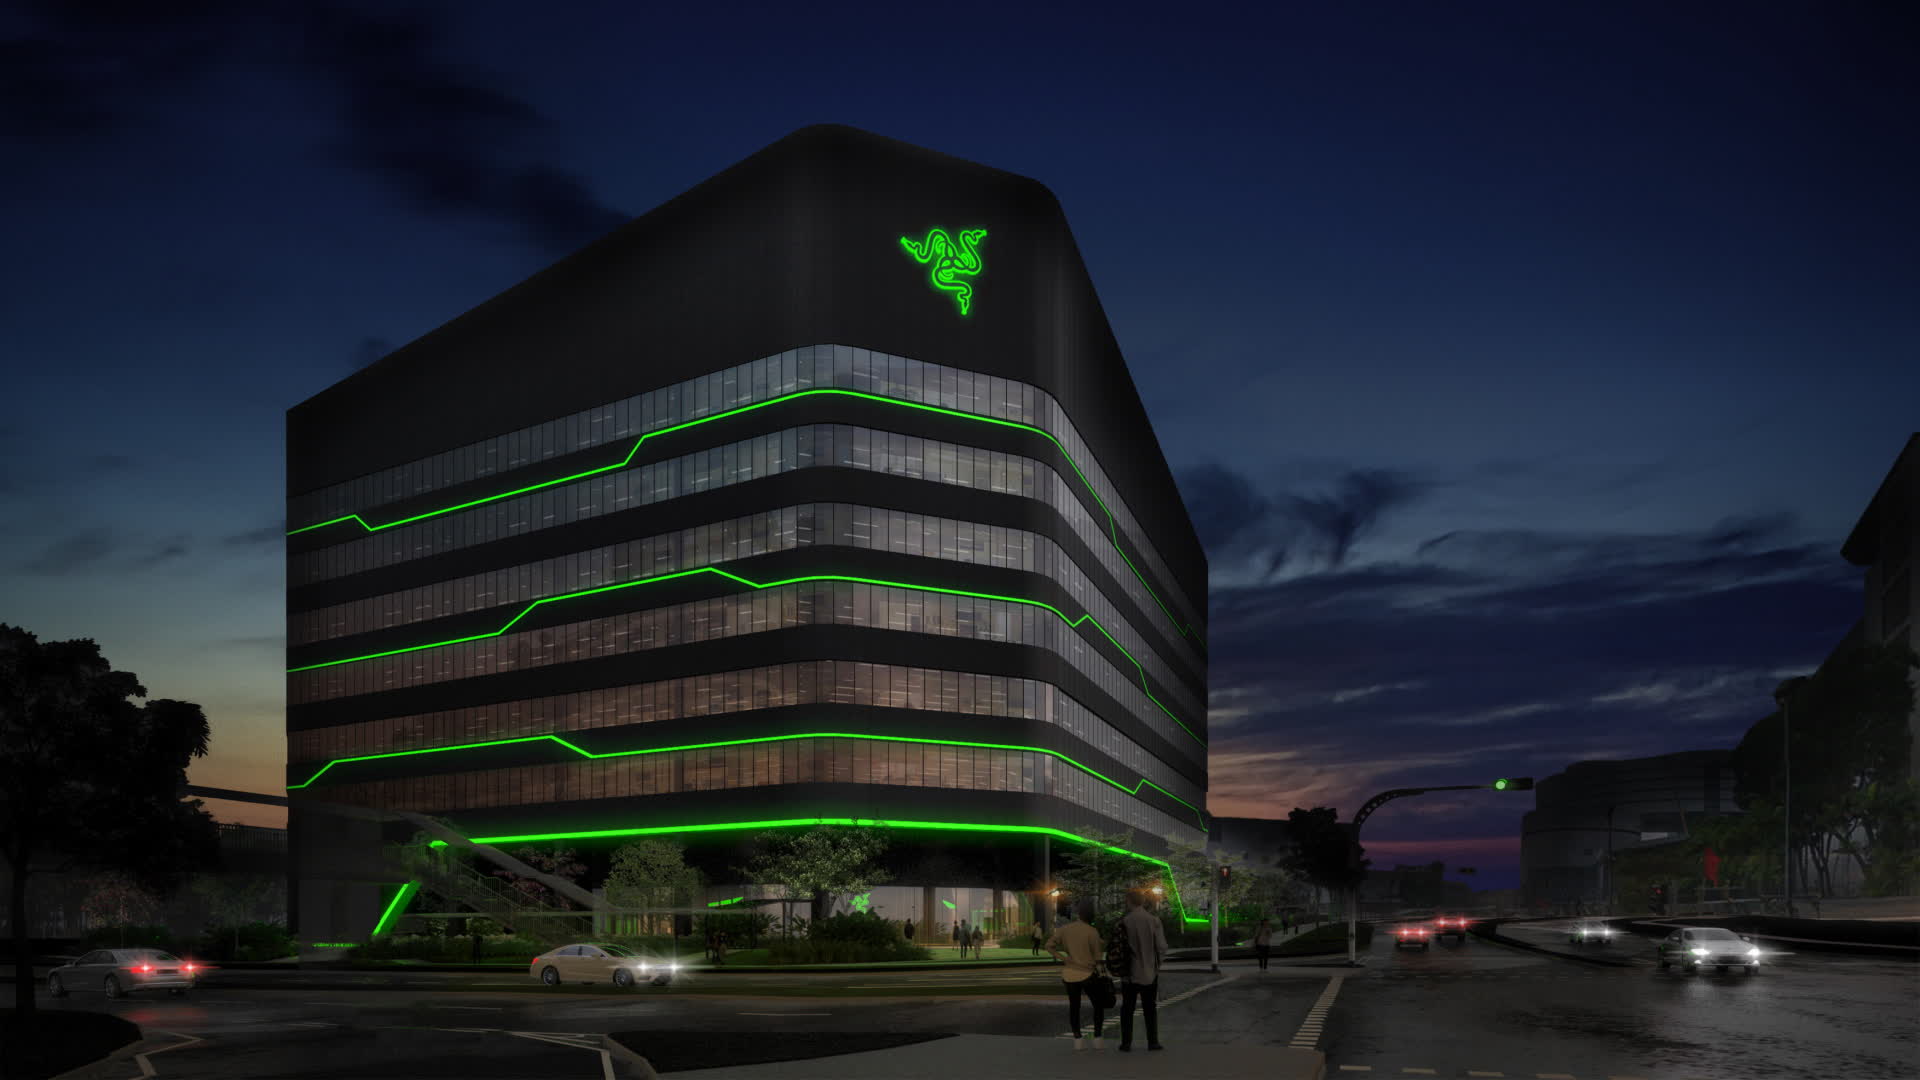 Razer commits to sustainability, will use 100 percent renewable energy across its offices by 2025